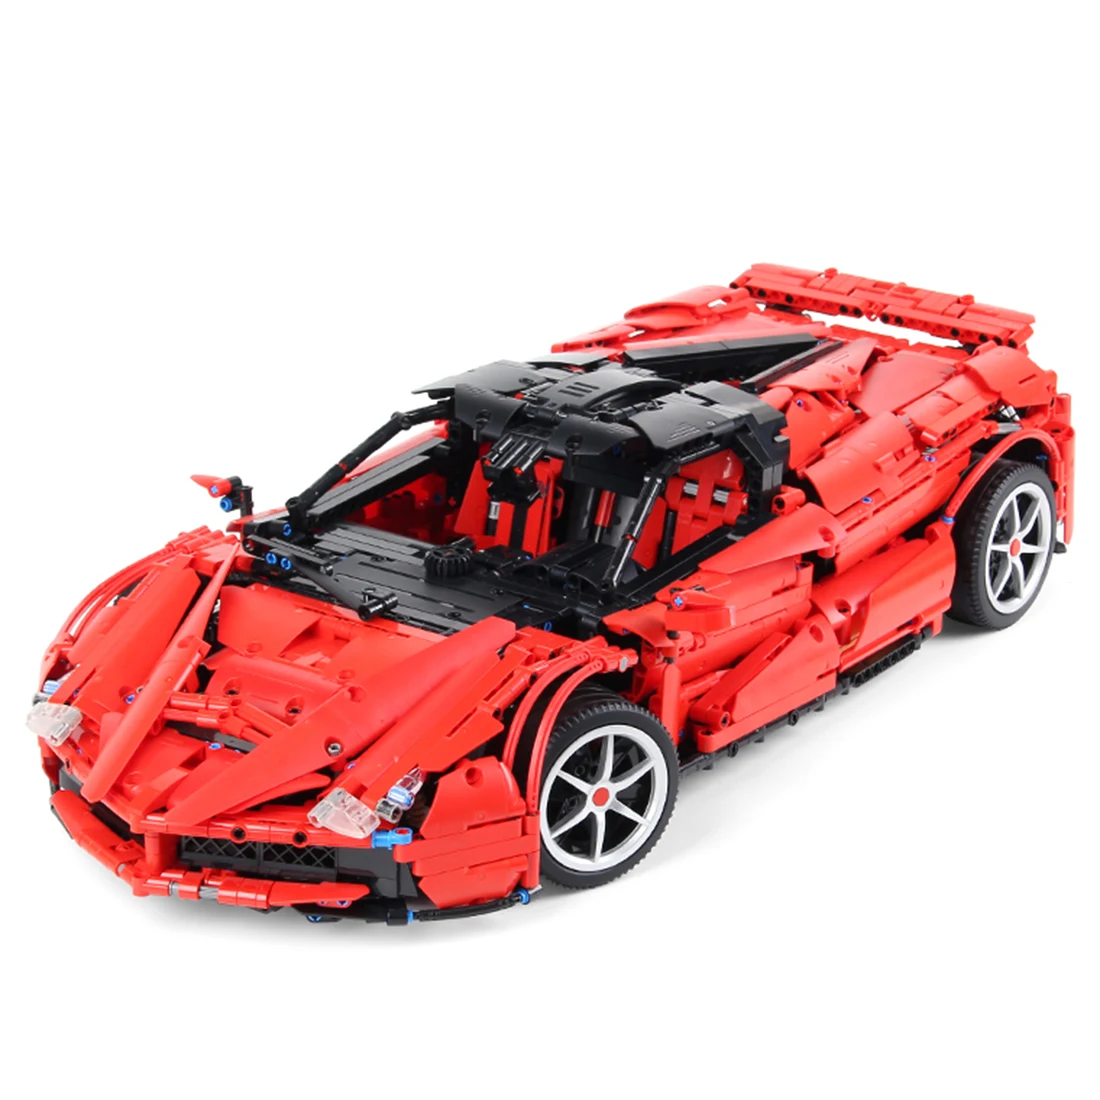 Hot Product  3273Pcs 1:18 Scale RC Sports Car Vehicle Building Block Children DIY Small Particle Construction Mo